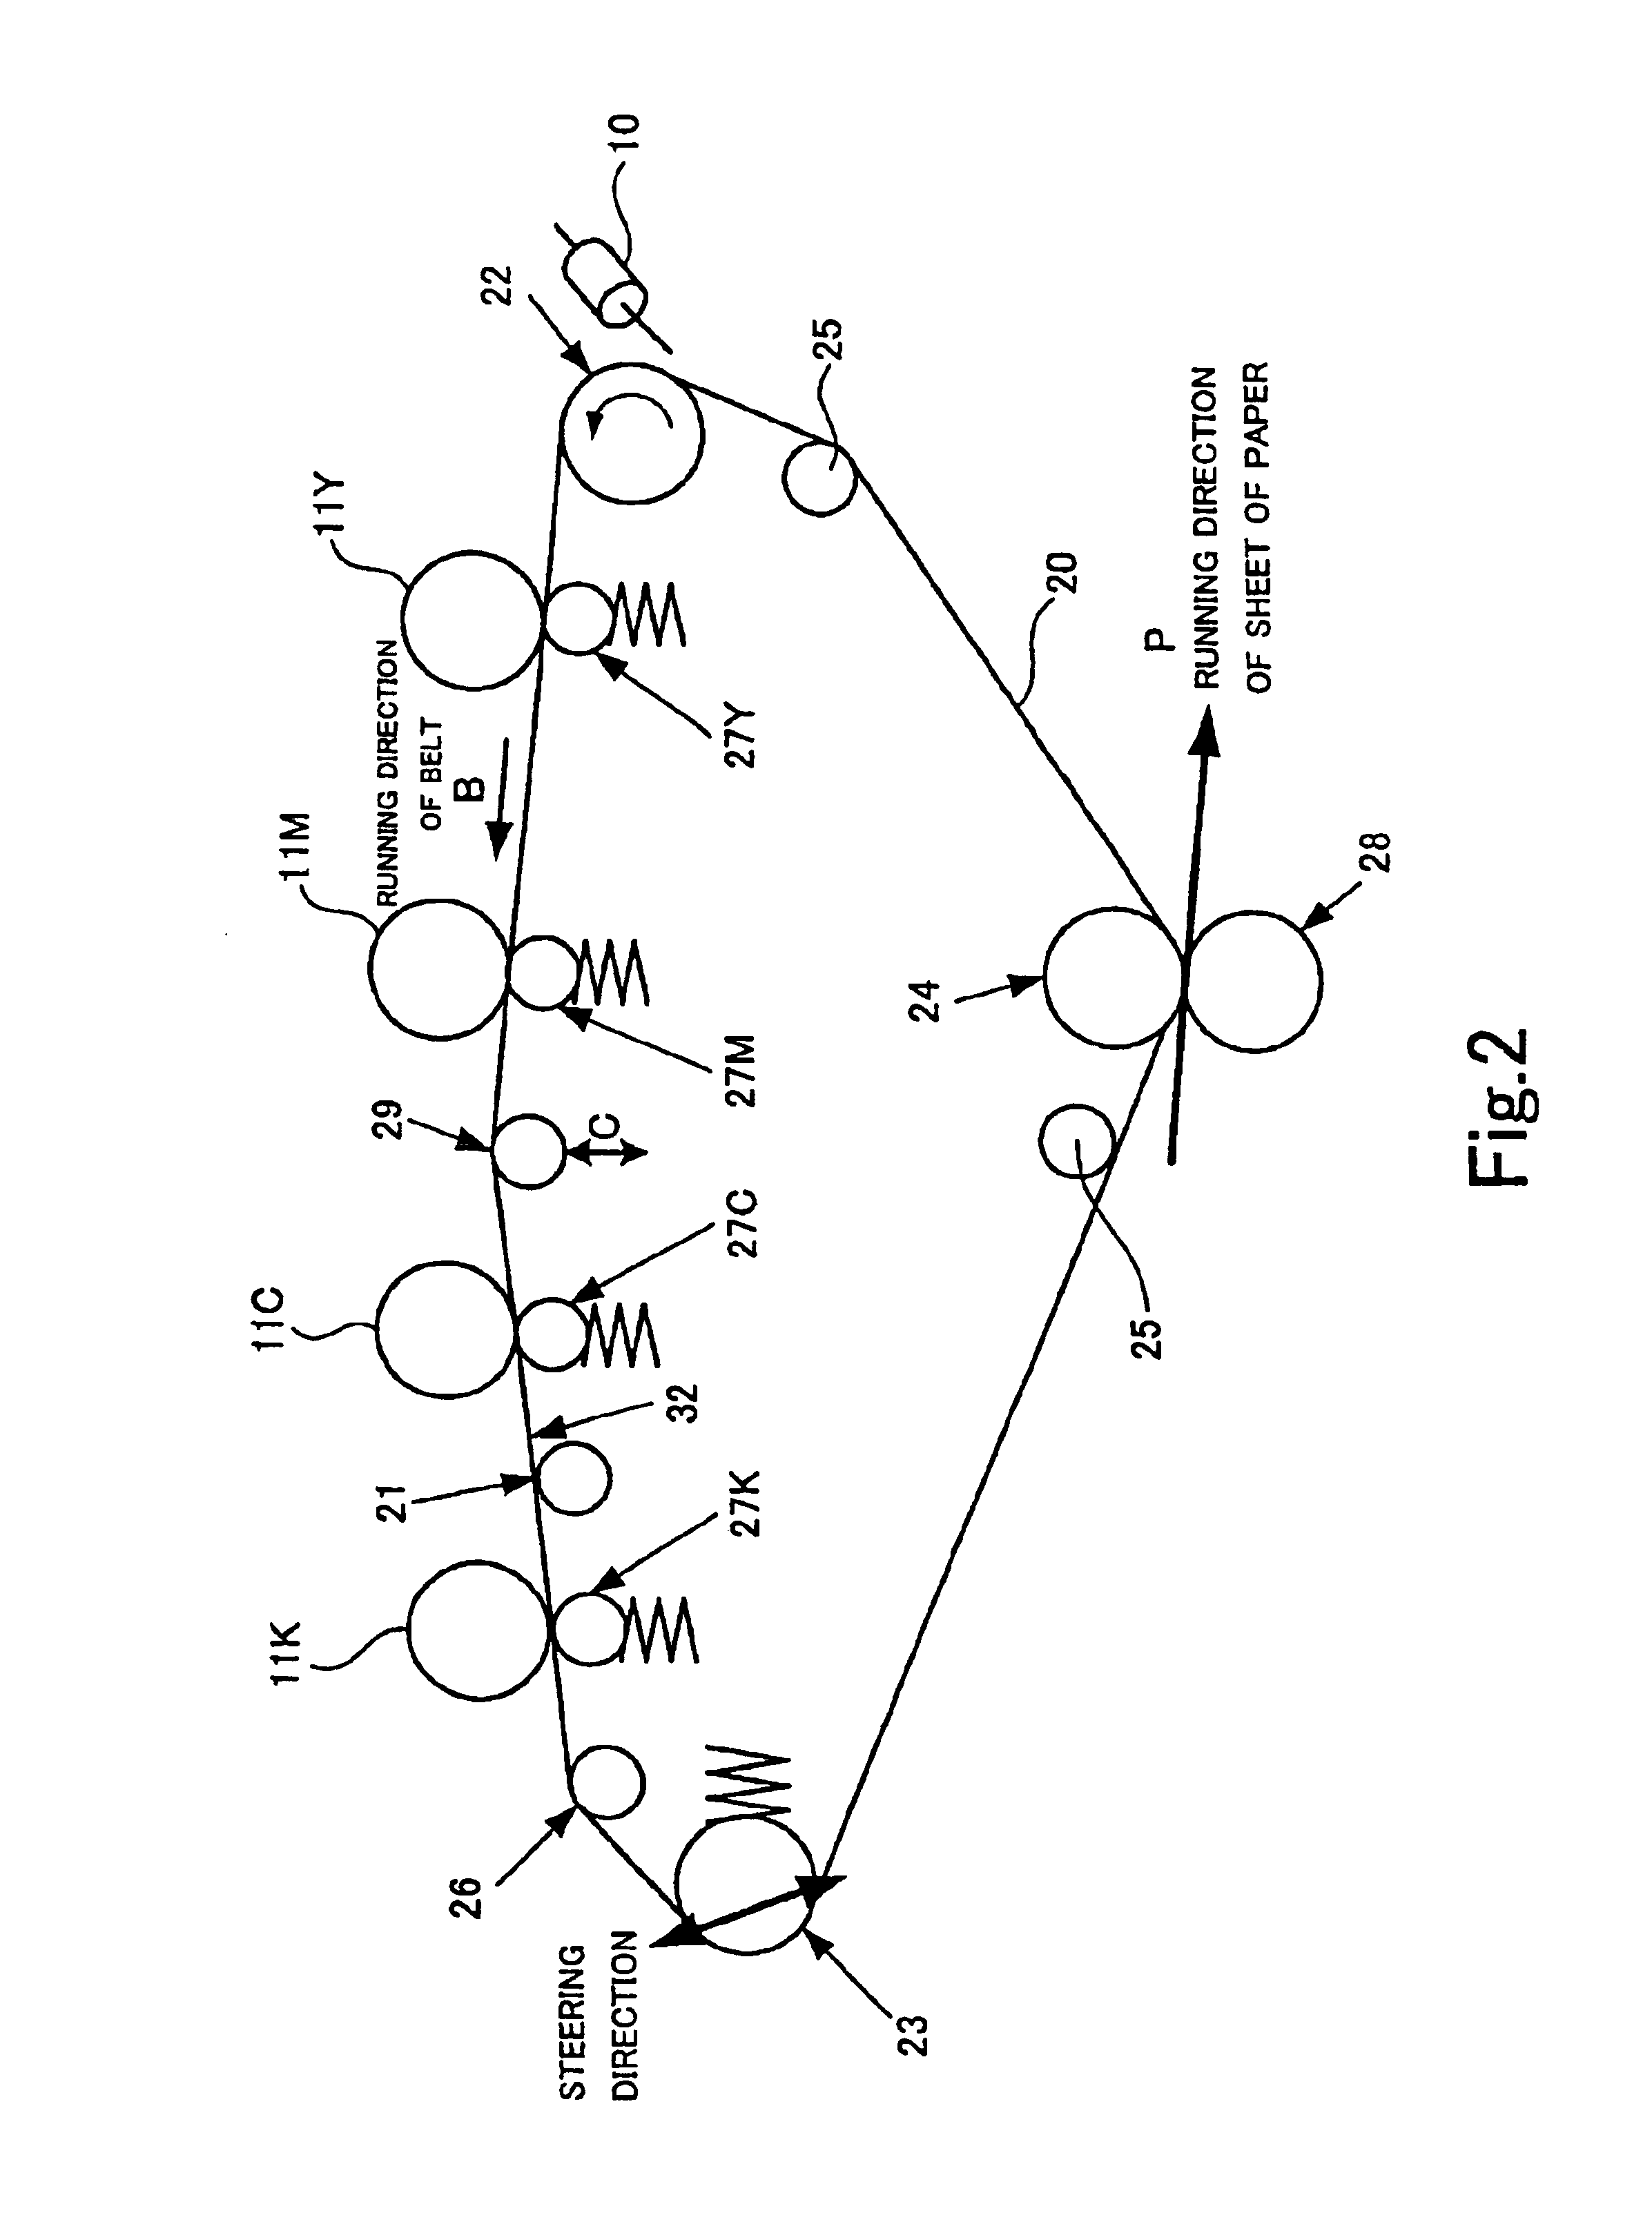 Image forming apparatus with belt, plural sensitized bodies, and belt positioning mechanism